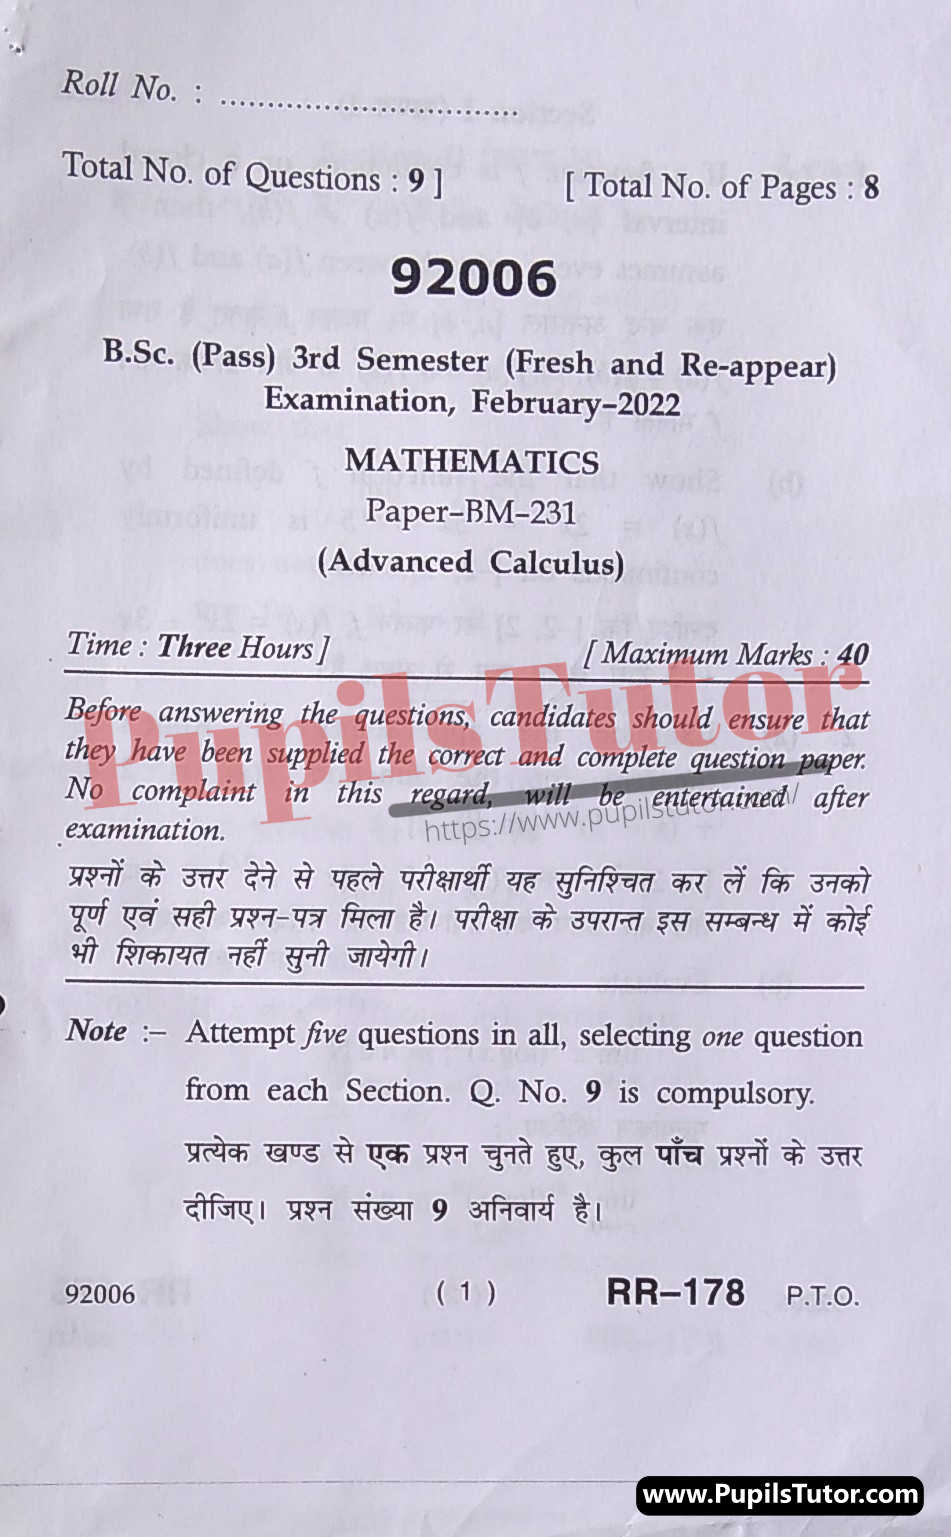 MDU (Maharshi Dayanand University, Rohtak Haryana) BSc Mathematics Pass Course Third Semester Previous Year Advanced Calculus Question Paper For February, 2022 Exam (Question Paper Page 1) - pupilstutor.com